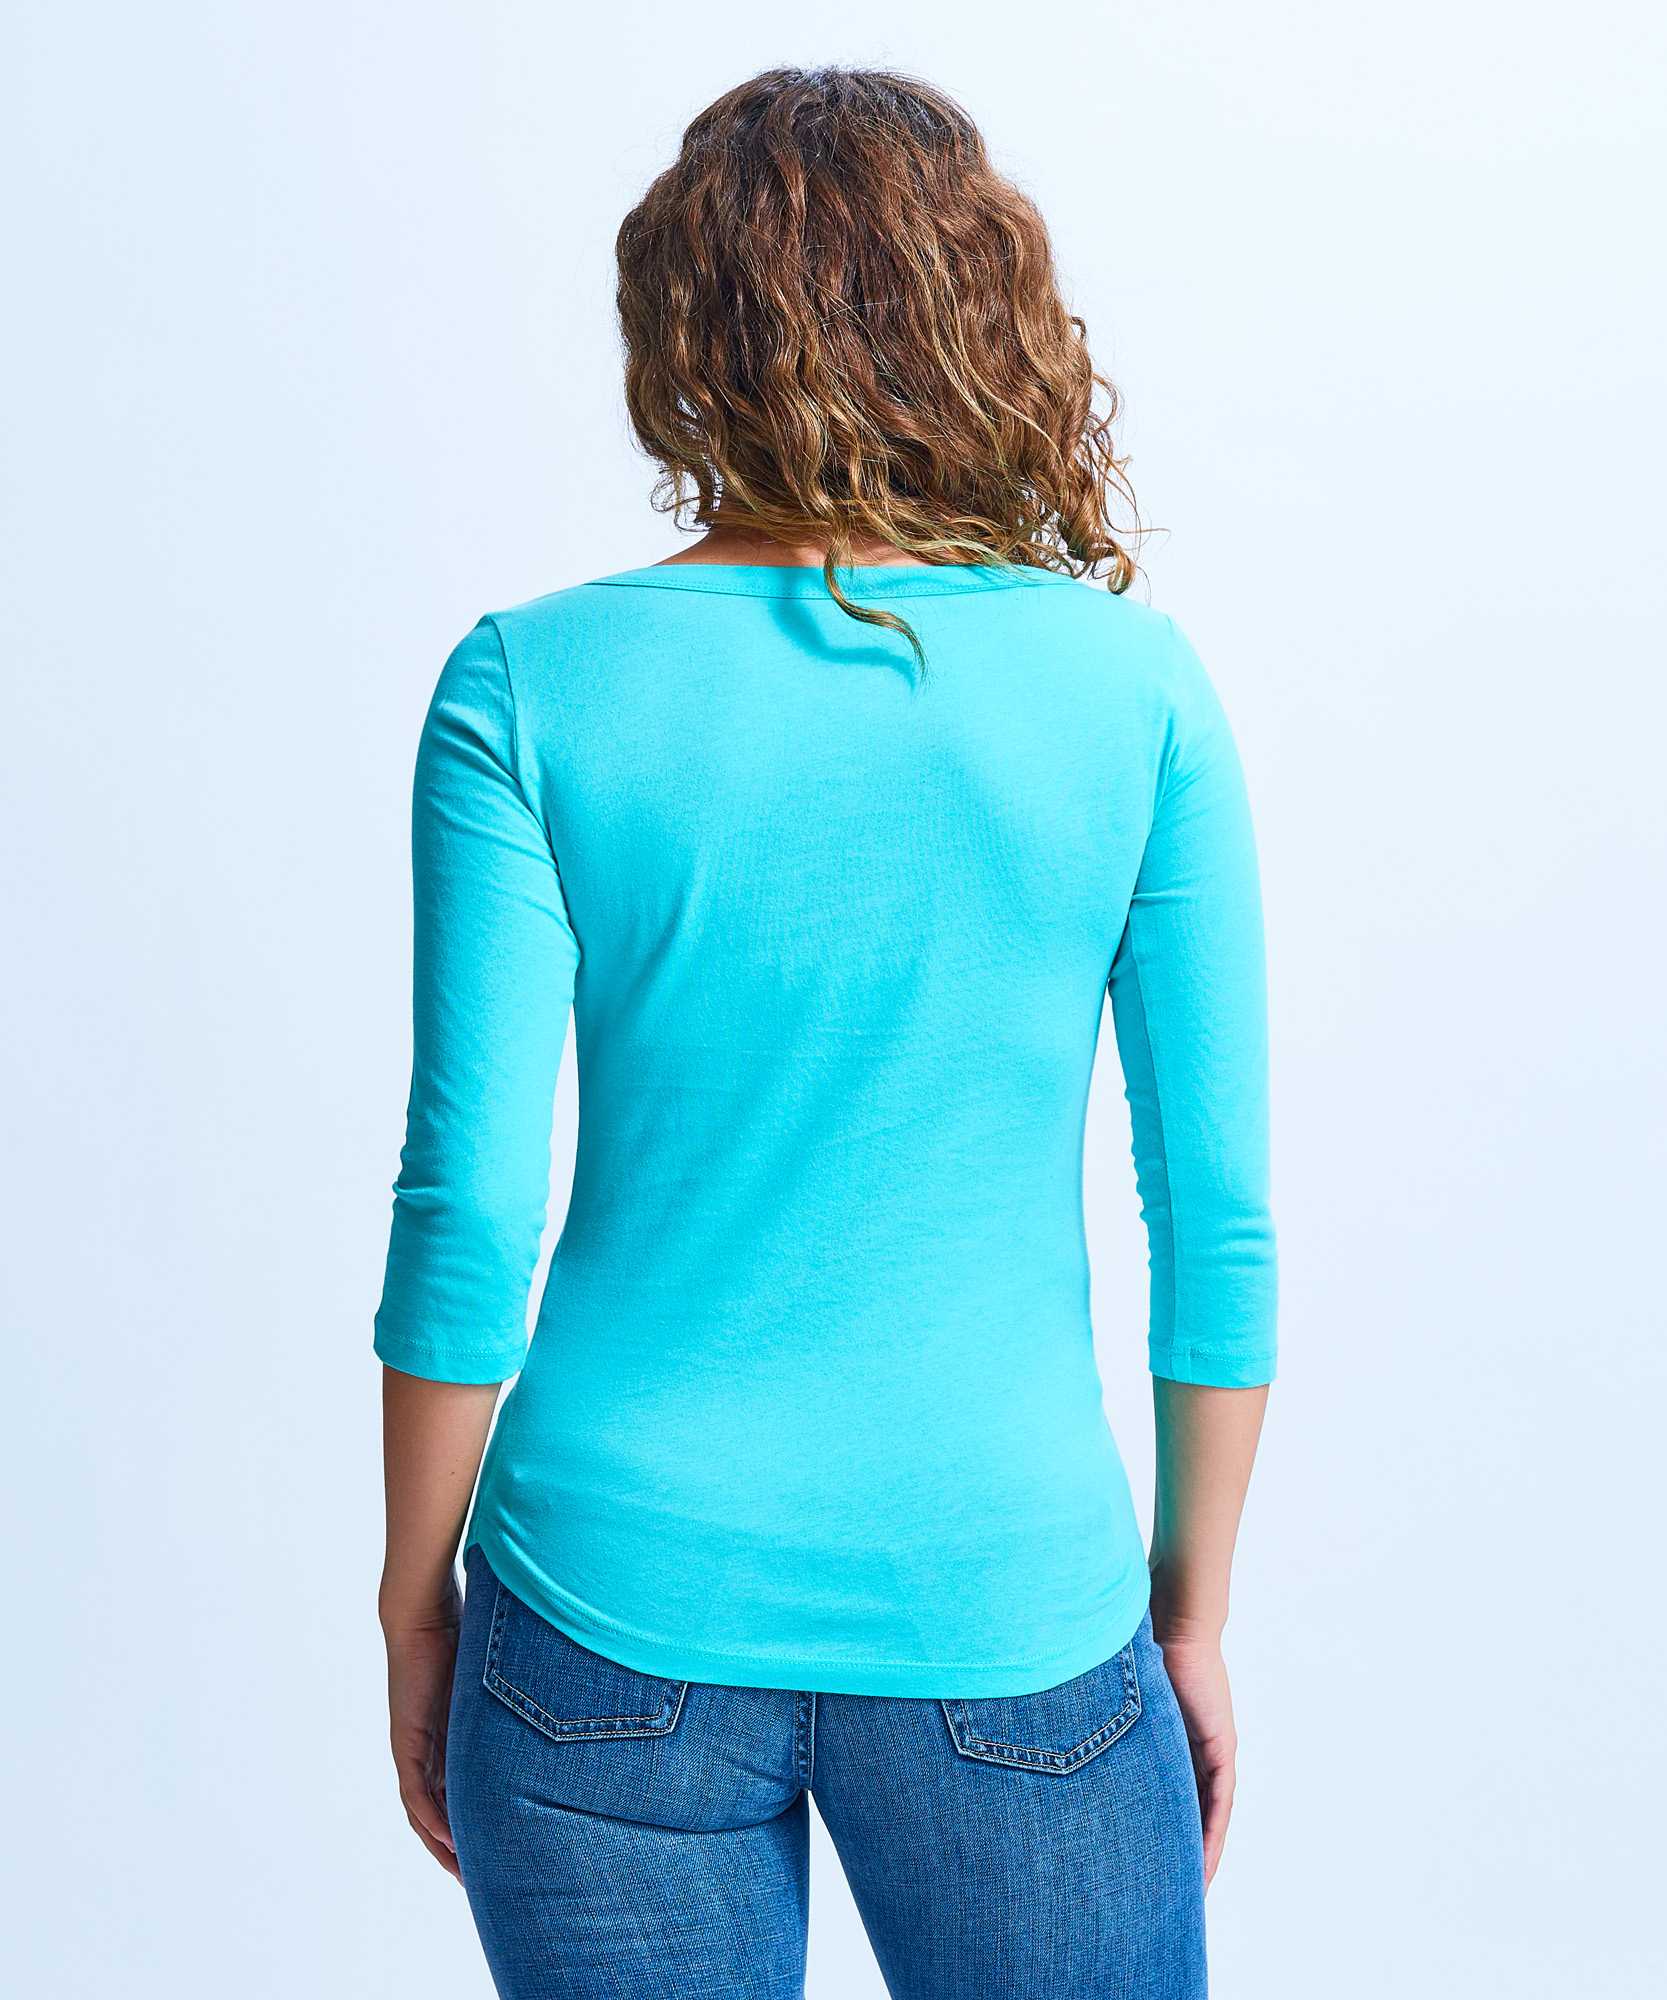 Boat Neck 3/4 Slv Fitted Top: Stylish and Comfortable